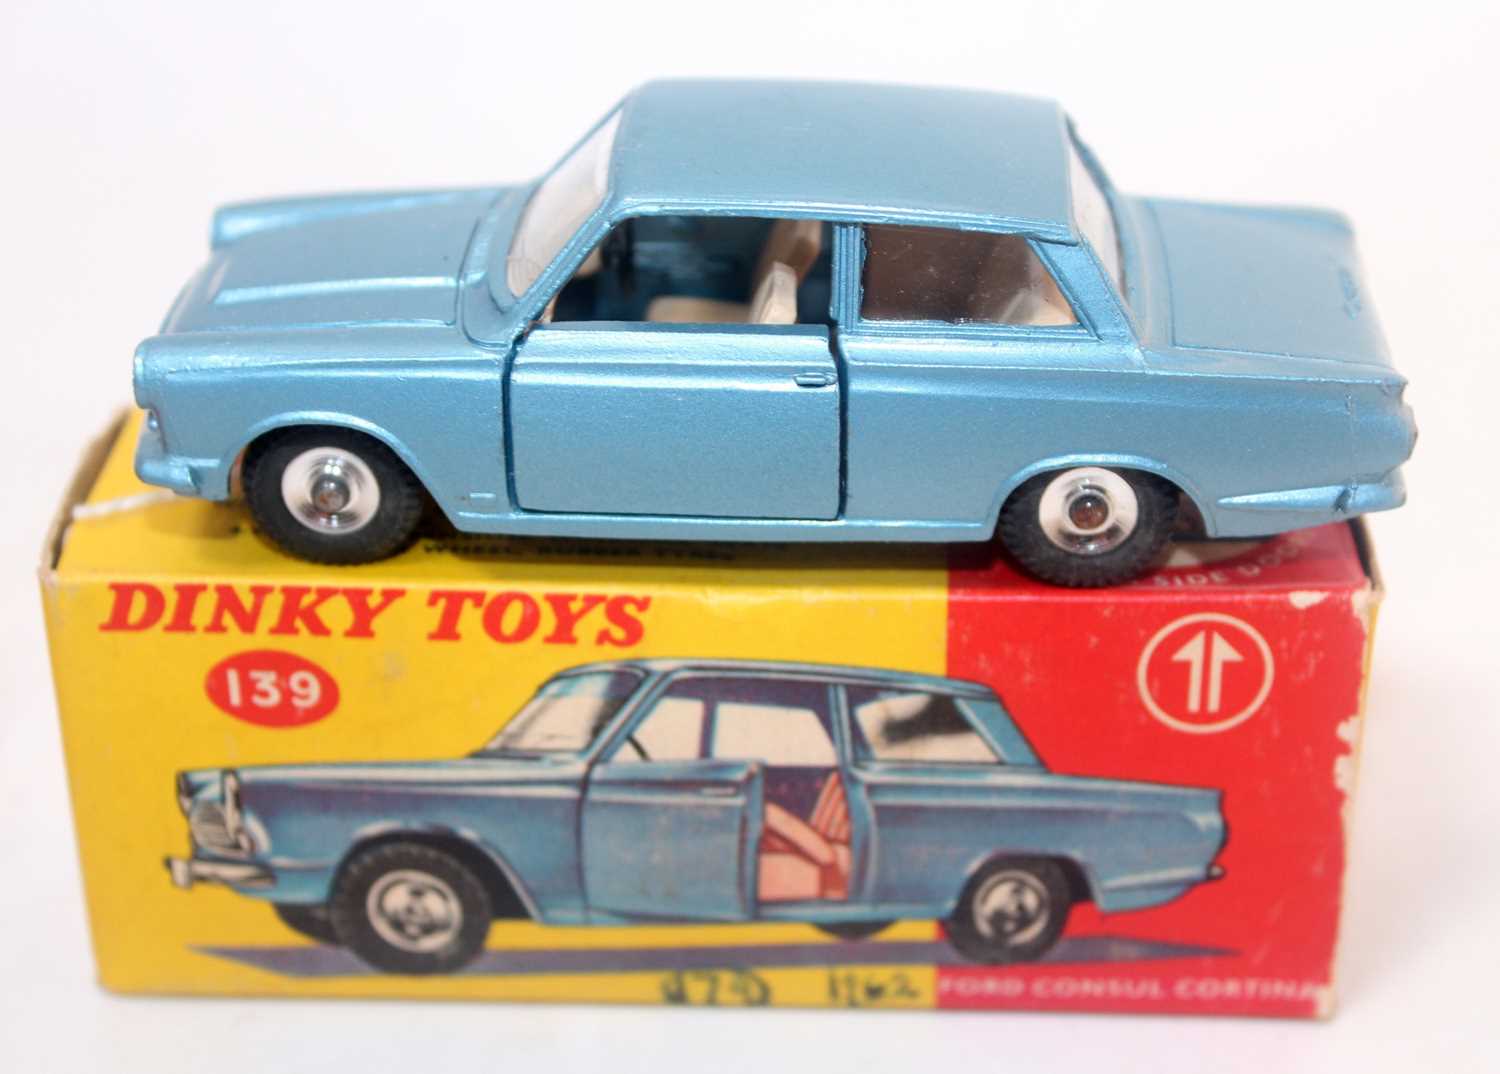 A Dinky Toys No. 139 Ford Console Cortina comprising metallic blue body with green interior and spun